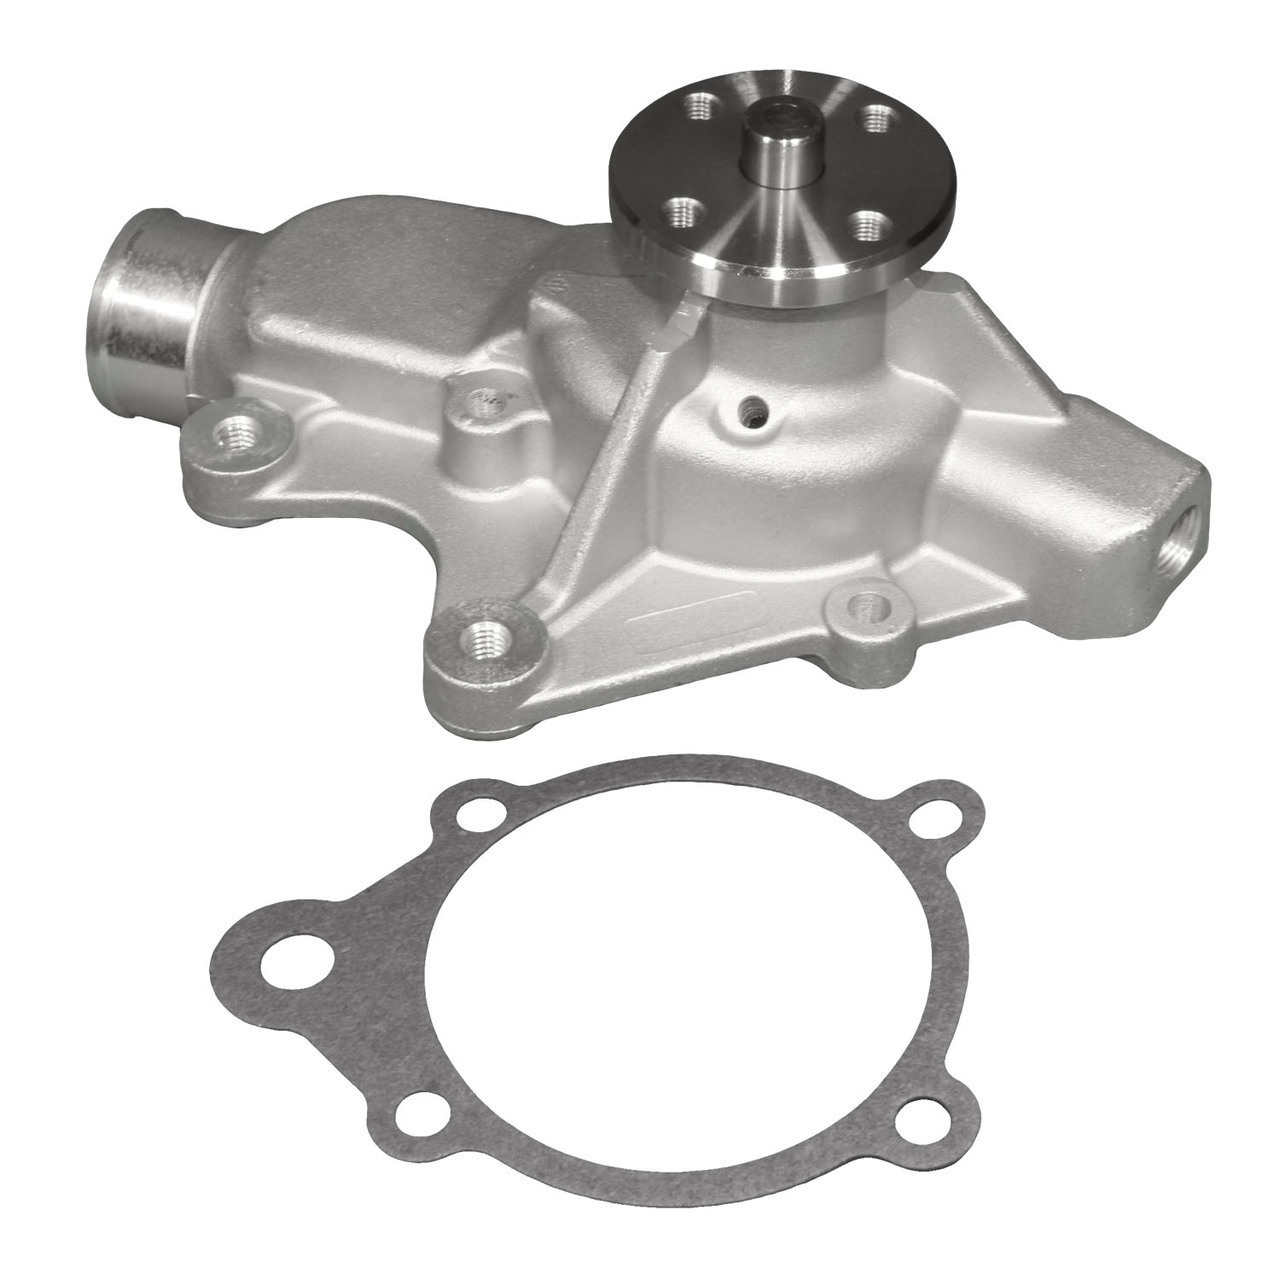 1997 Jeep Wrangler Engine Water Pump - ACDelco 252-279